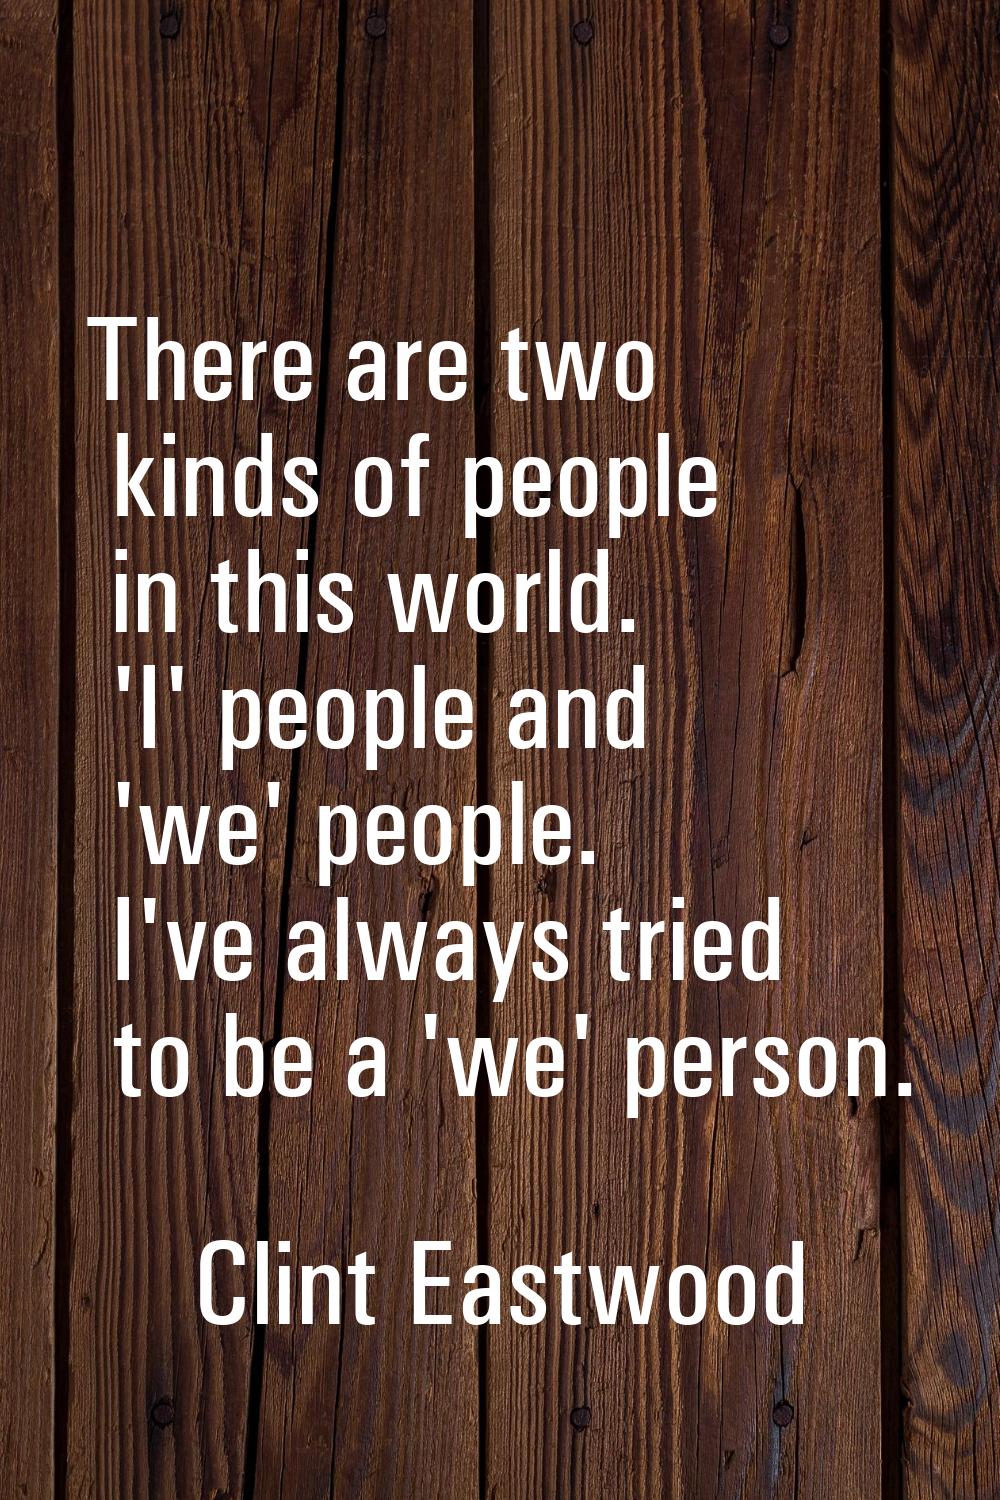 There are two kinds of people in this world. 'I' people and 'we' people. I've always tried to be a 